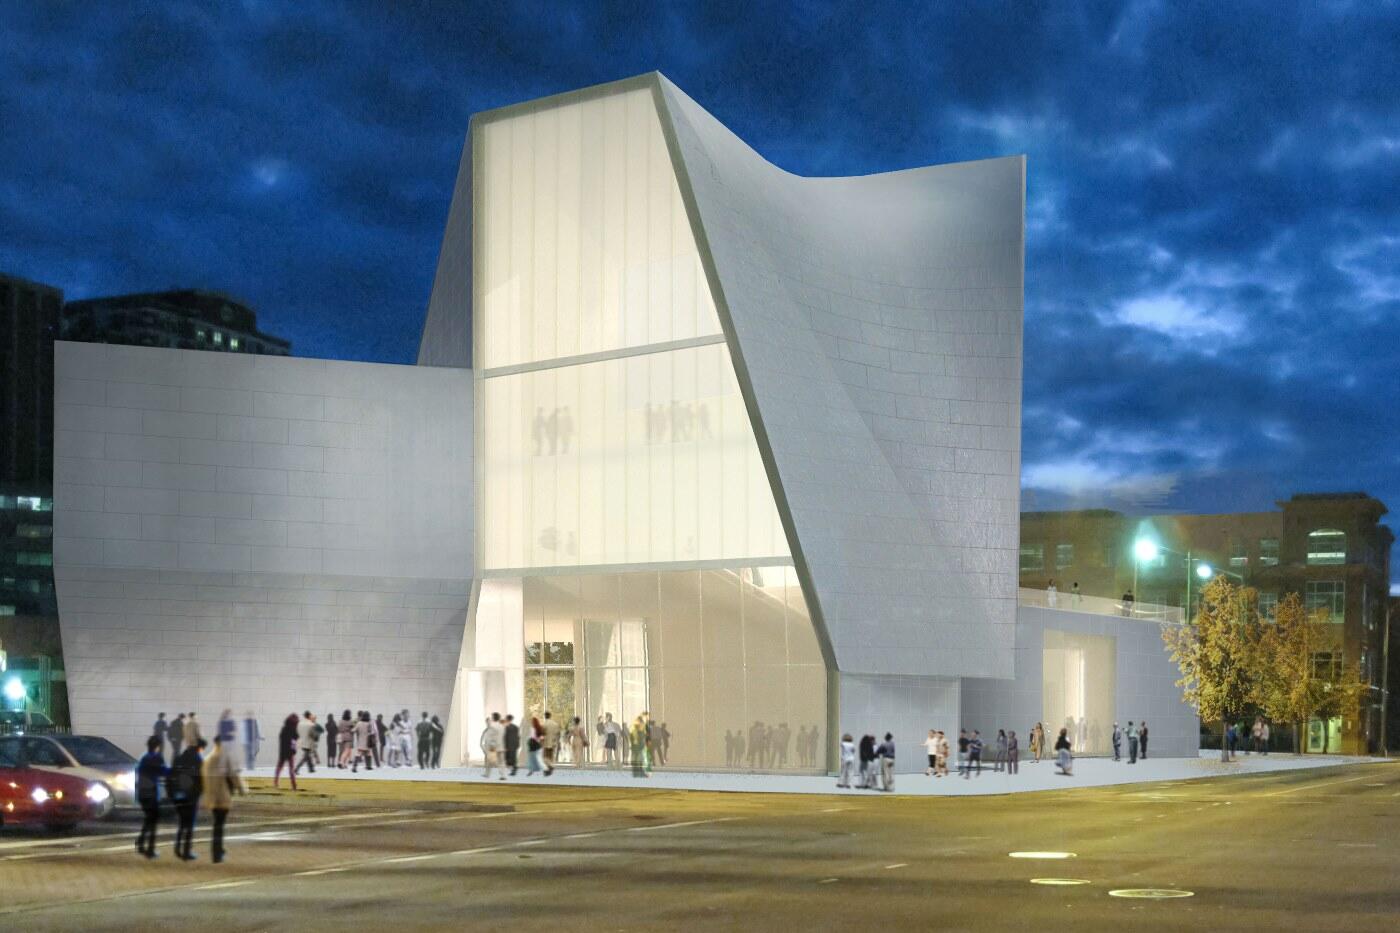 Rendering of the exterior of VCU's Institute for Contemporary Art in Richmond, VA. Designed by Steven Holl Architects, the ICA is scheduled to open in 2016. Image courtesy of Steven Holl Architects.